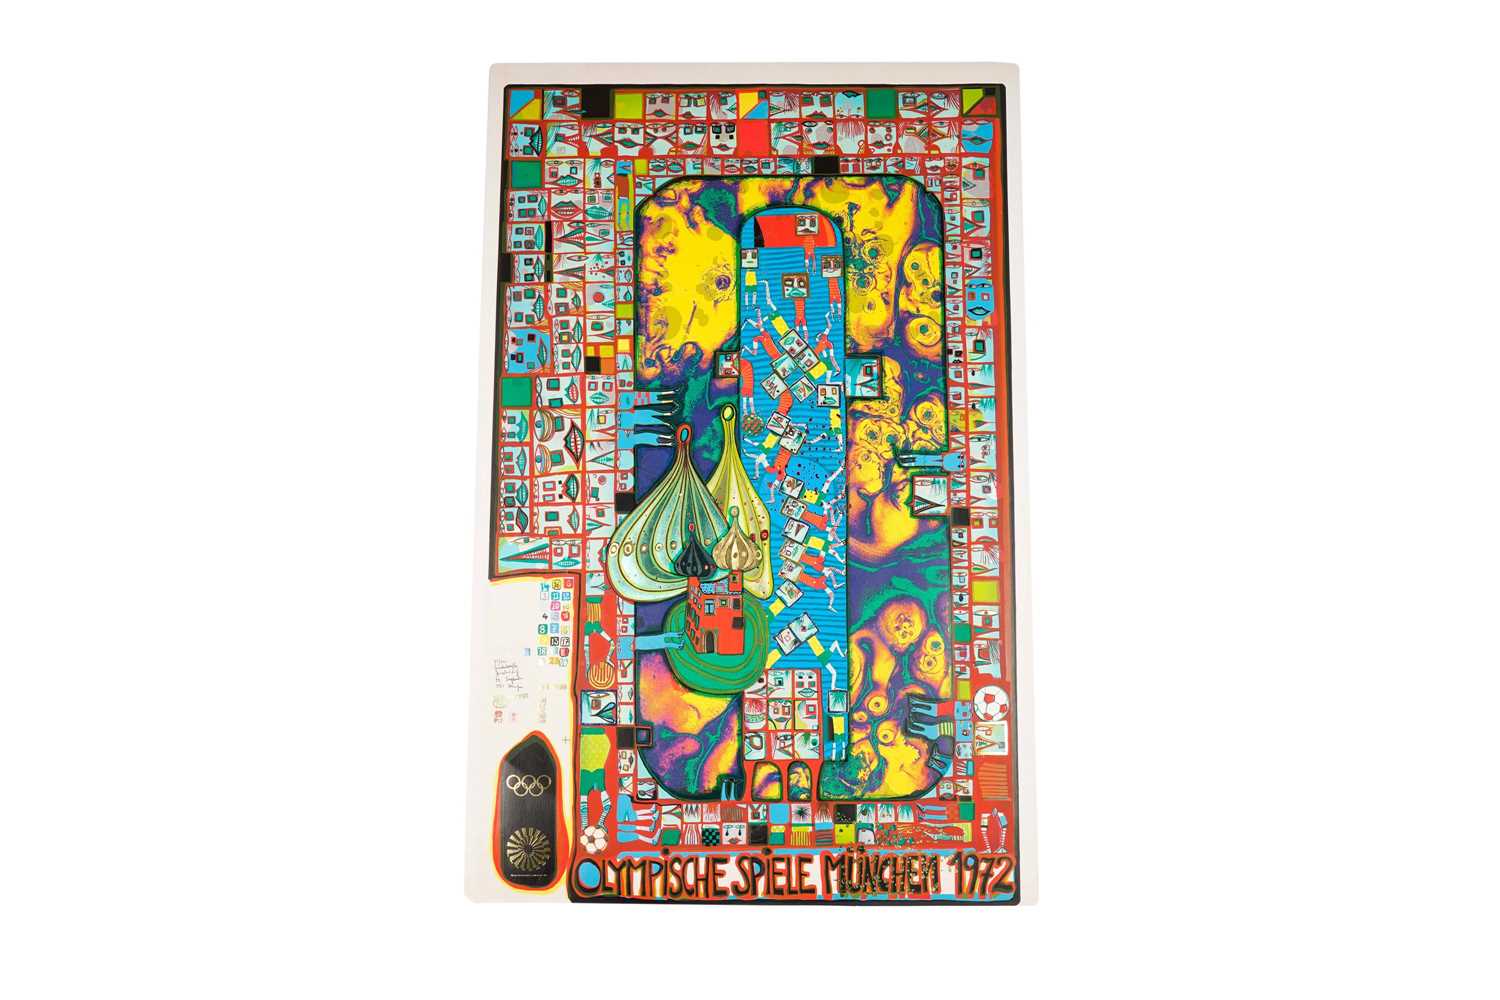 Friedensreich Hundertwasser - Olympic Games Munich 1972 poster | signed limited edition lithograph